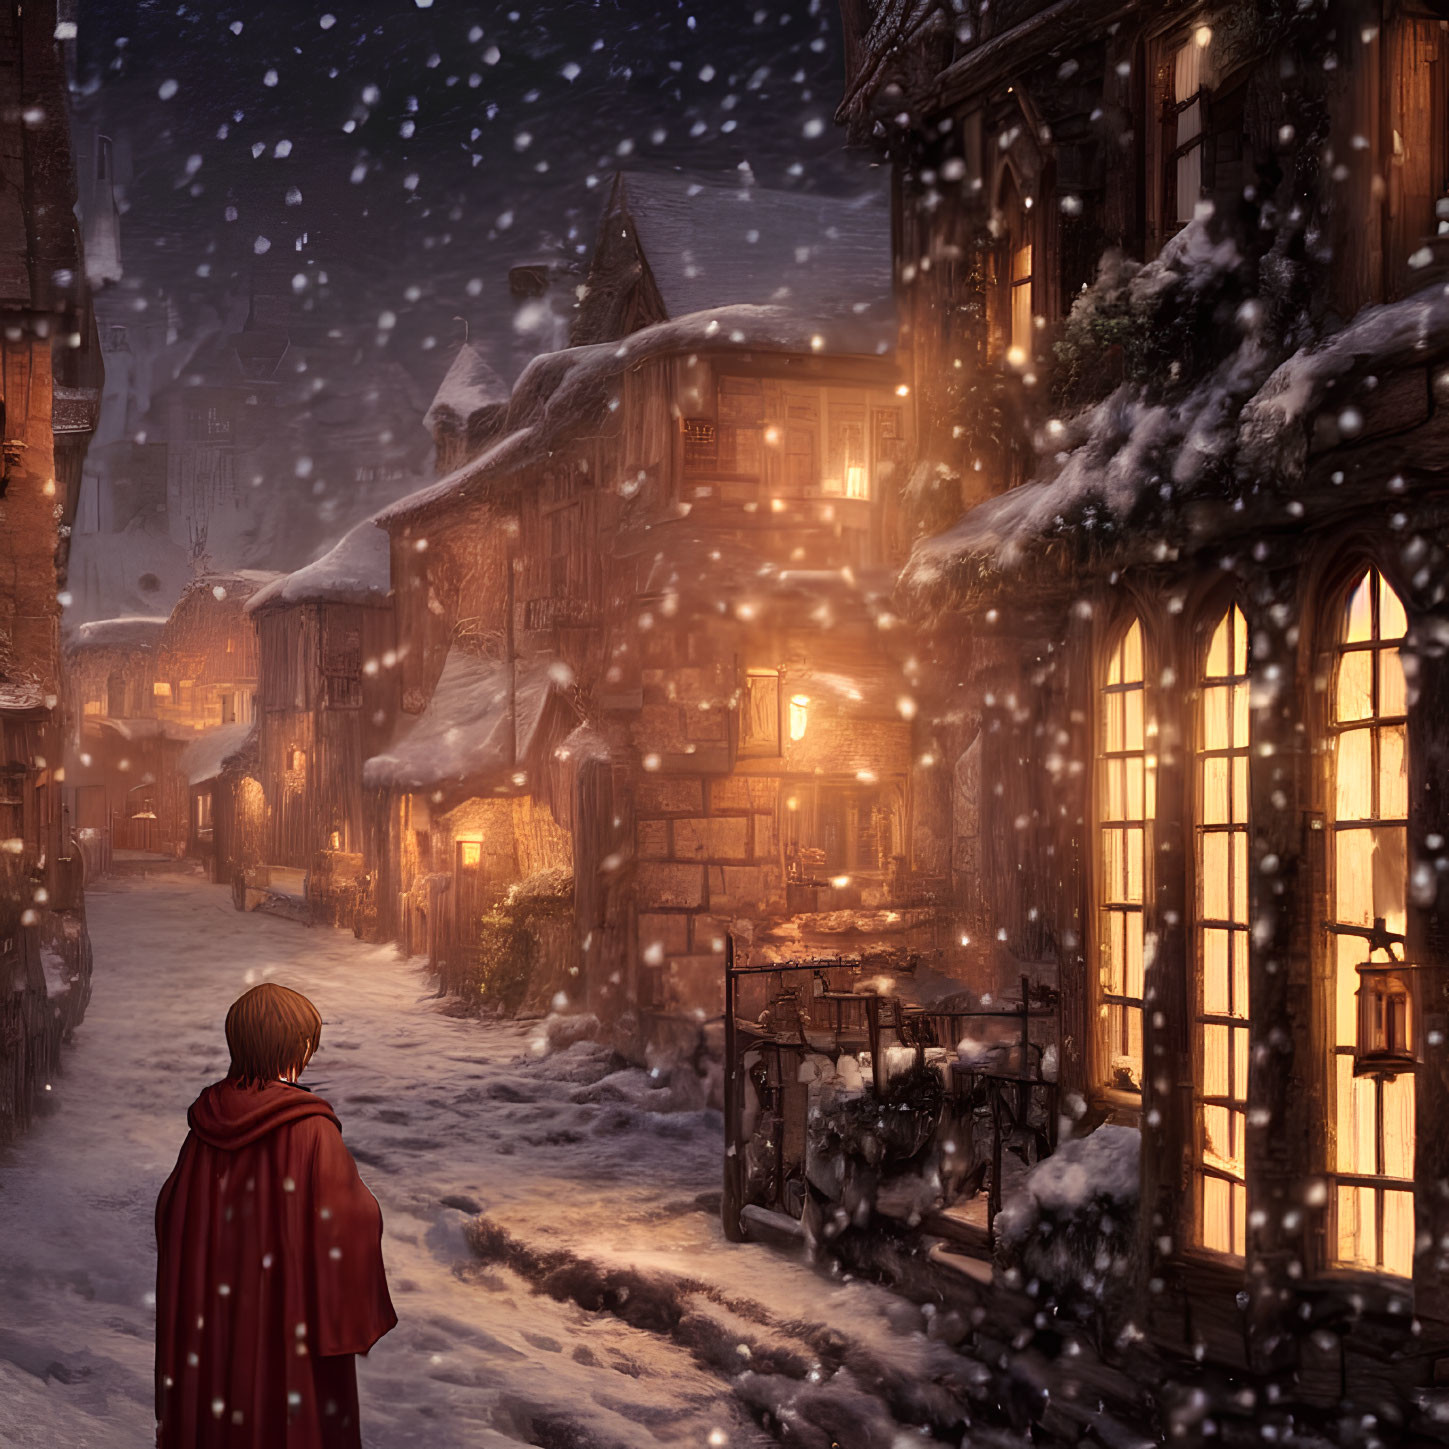 Person in Red Cloak Observing Snowy Cobblestone Street at Winter Nightfall